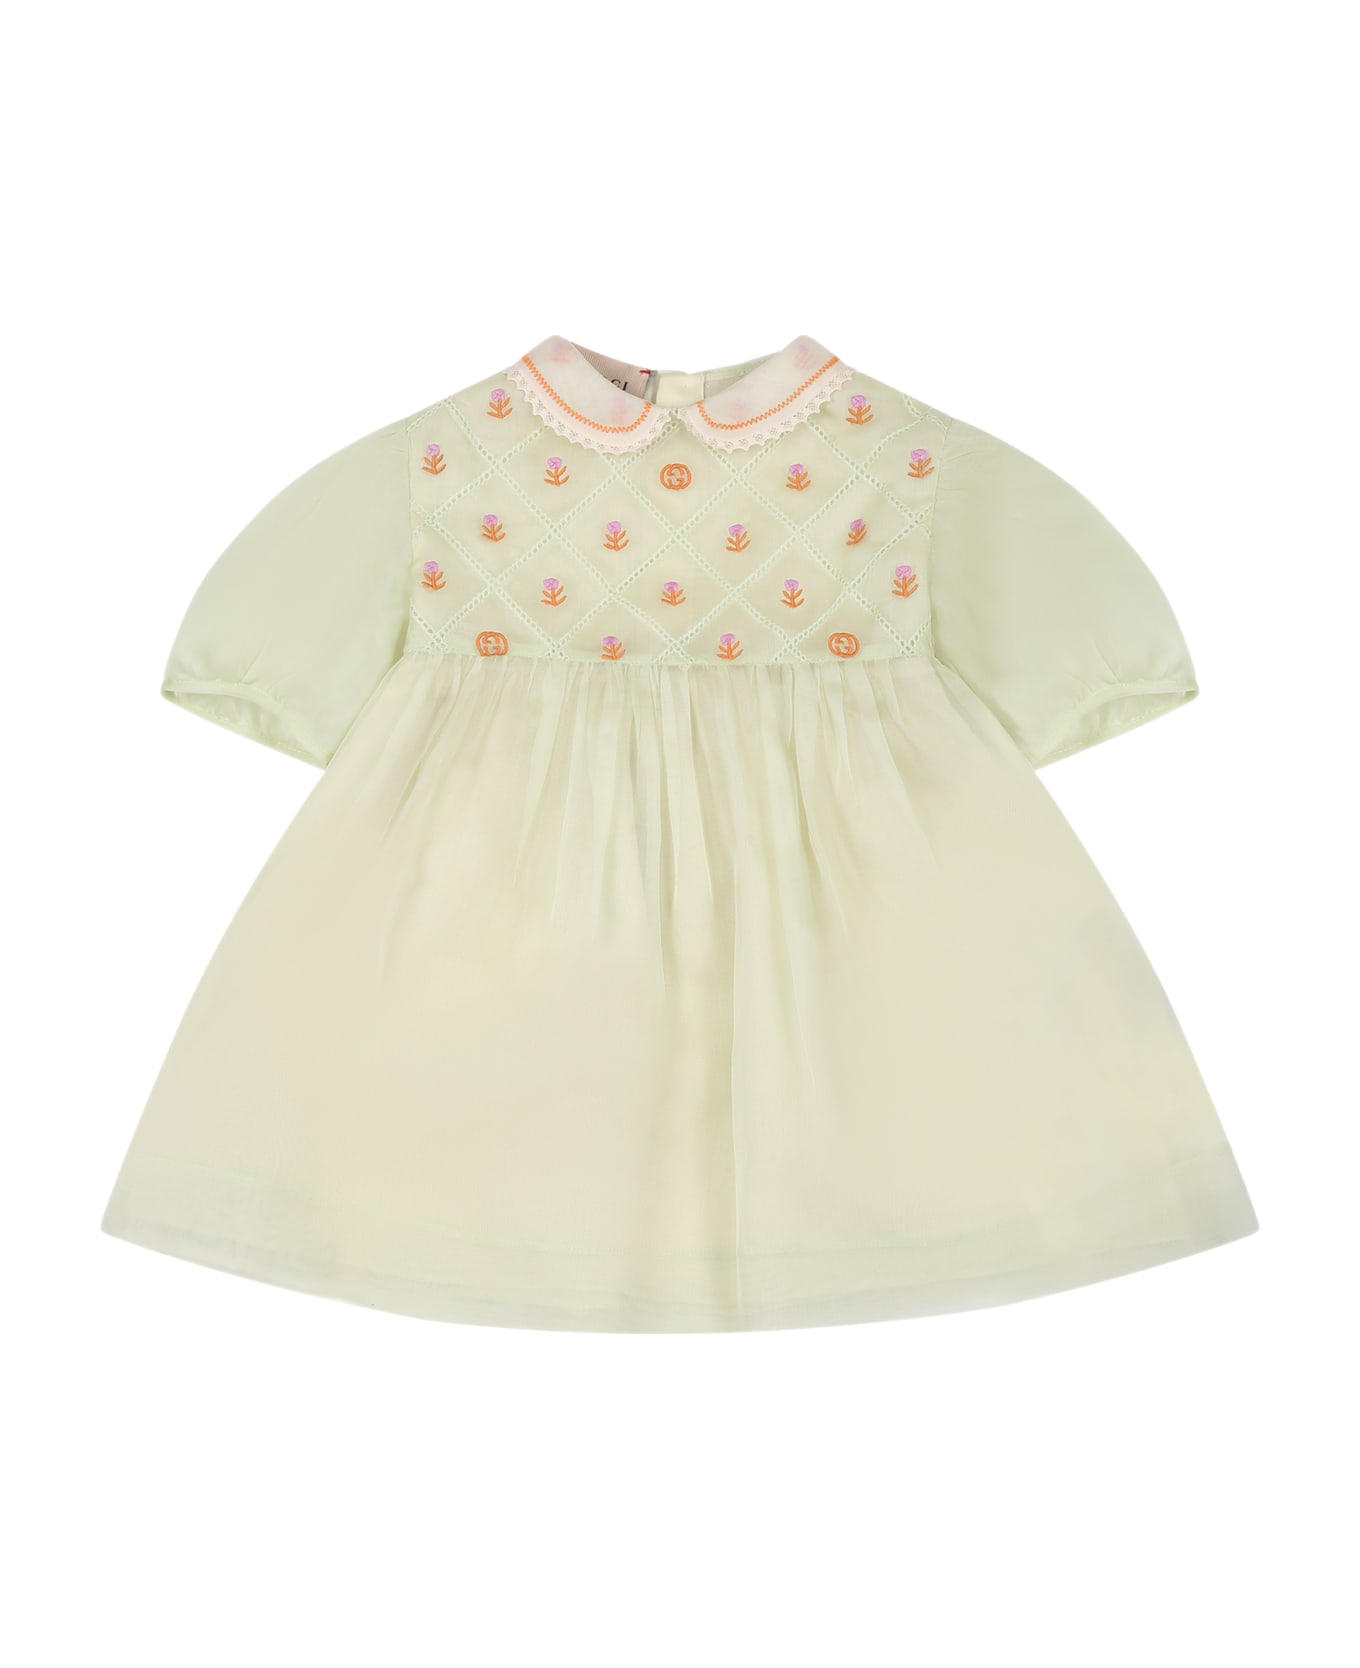 Gucci Green Dress For Baby Girl With Flower And Interlocking Gg - Green